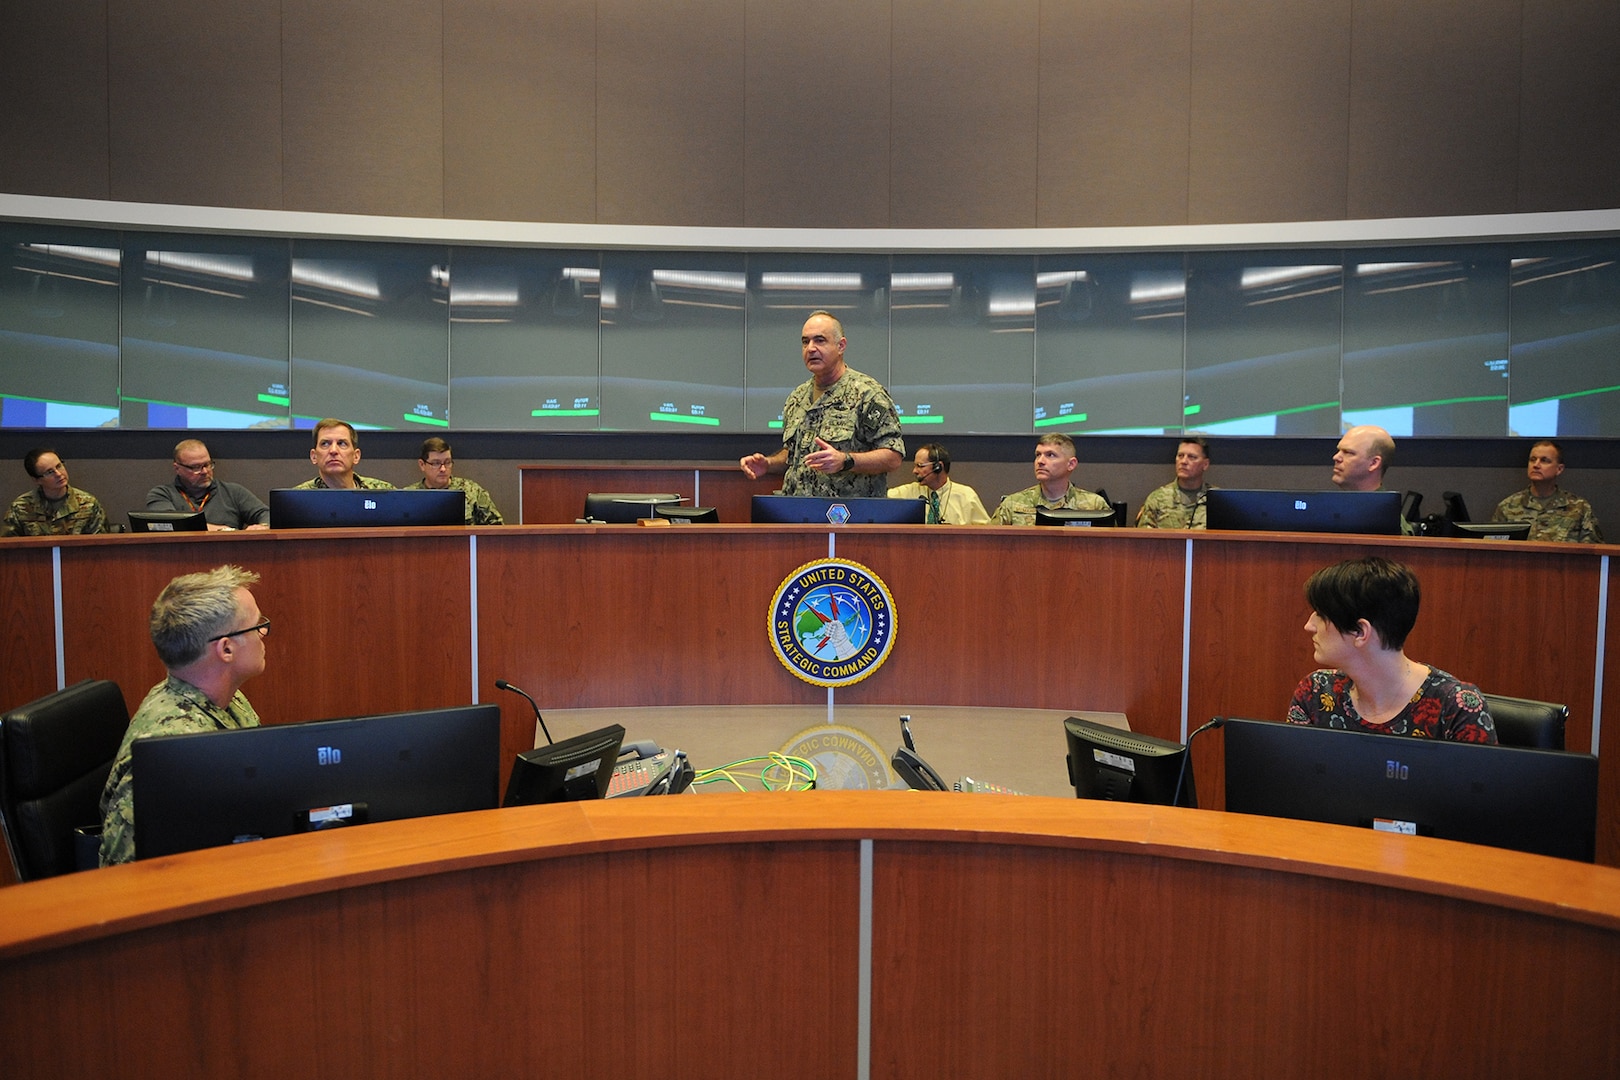 U.S. Navy Adm. Charles “Chas” Richard, commander of U.S. Strategic Command (USSTRATCOM), speaks to his key staff on the battle deck of USSTRATCOM’s command and control facility (C2F) during Exercise Global Lightning 20 at Offutt Air Force Base, Neb., Jan. 30, 2020. Global Lightning is an annual command and control exercise that employs global operations in coordination with other combatant commands, services, U.S. government agencies, and allies to deter, detect and, if necessary, defeat strategic attacks against the United States and its allies. This is the first major exercise USSTRATCOM conducted entirely from the C2F, the command’s newest weapon system that enables it to connect to national leadership, all three legs of the triad, and other platforms key to executing operations.